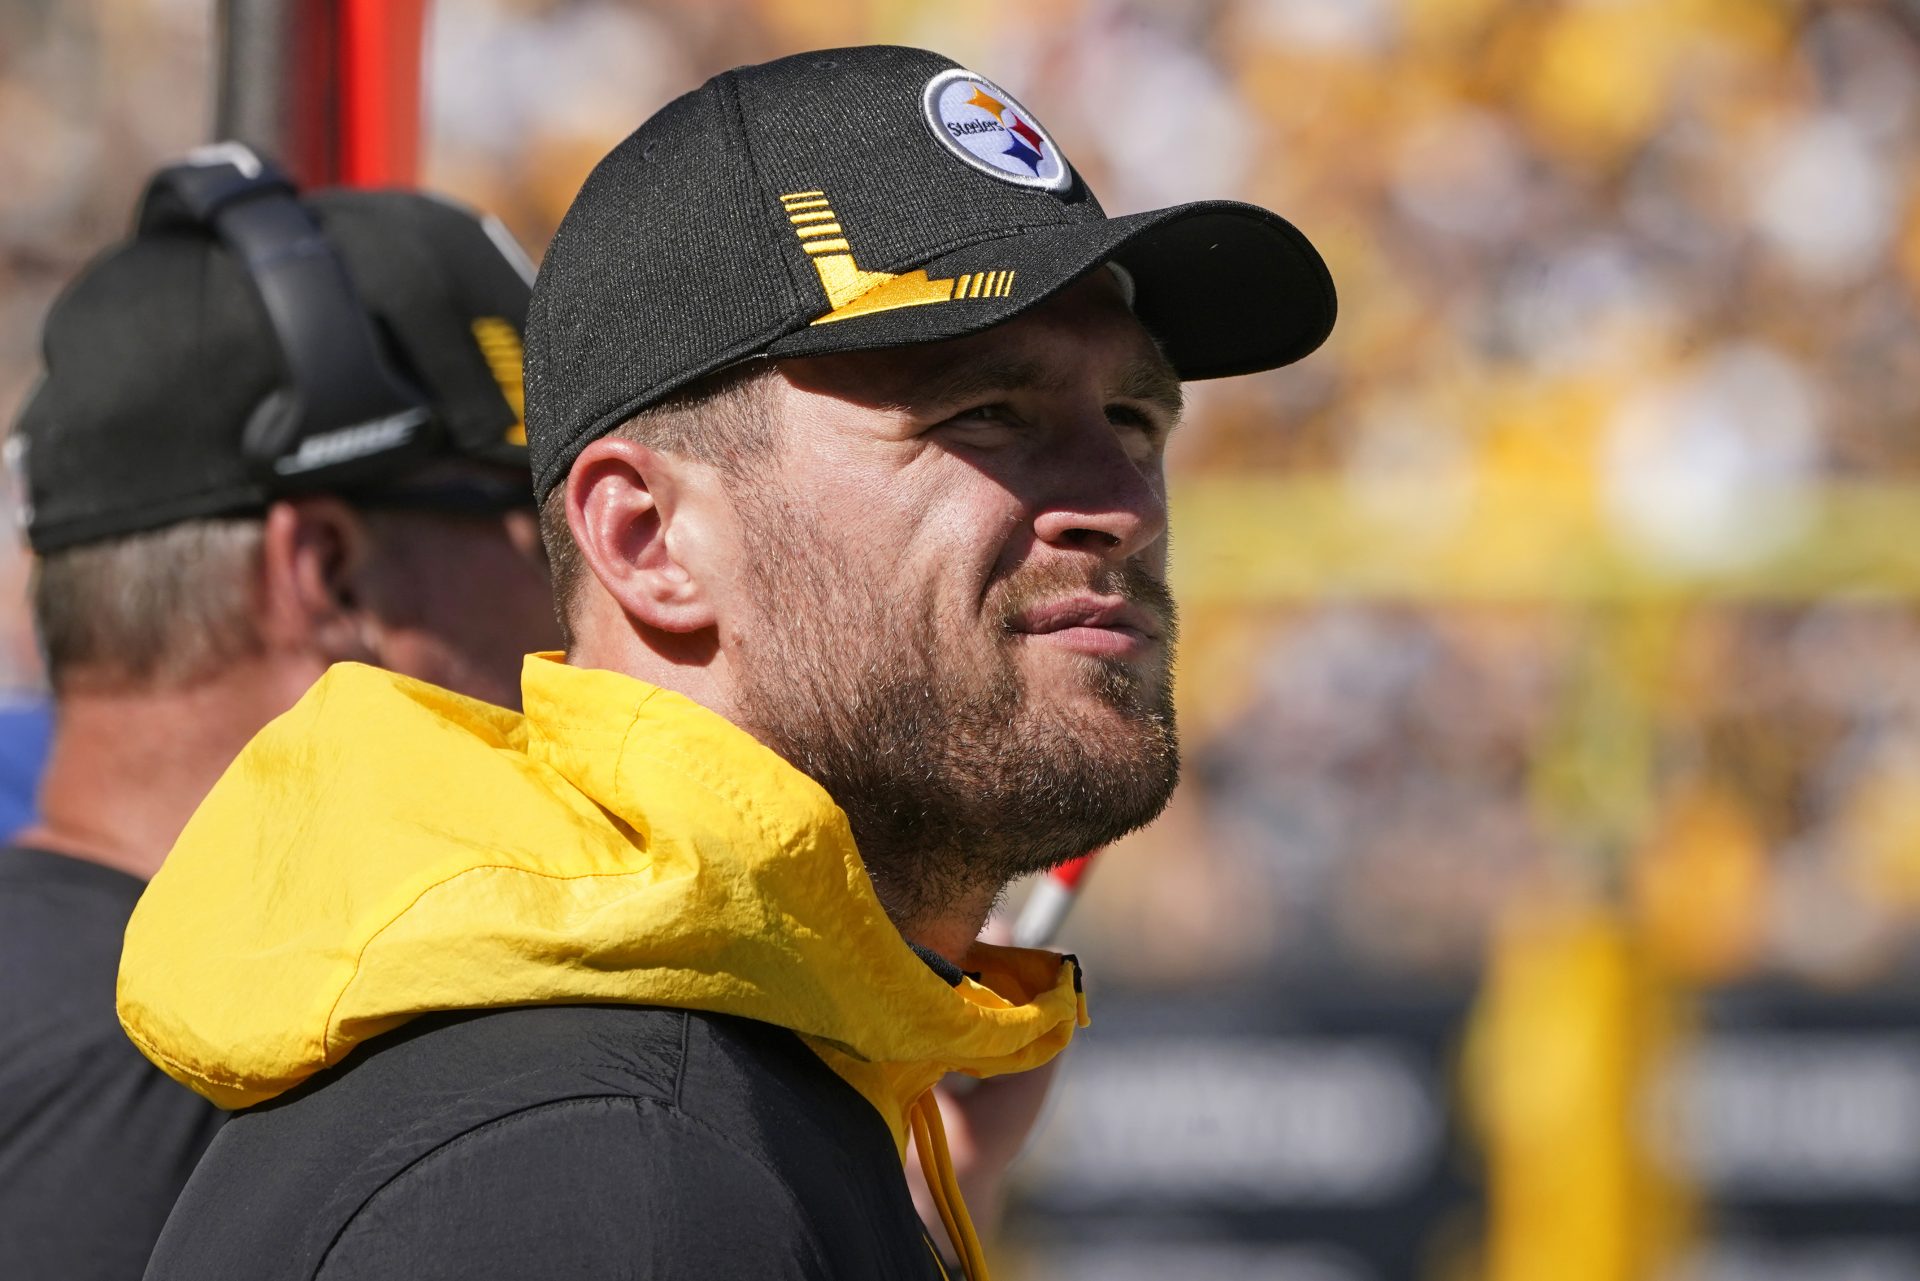 Pittsburgh Steelers outside linebacker T.J. Watt stands on the sidelines after being injured during the second half of an NFL football game against the Las Vegas Raiders, in Pittsburgh, Sunday, Sept. 19, 2021.